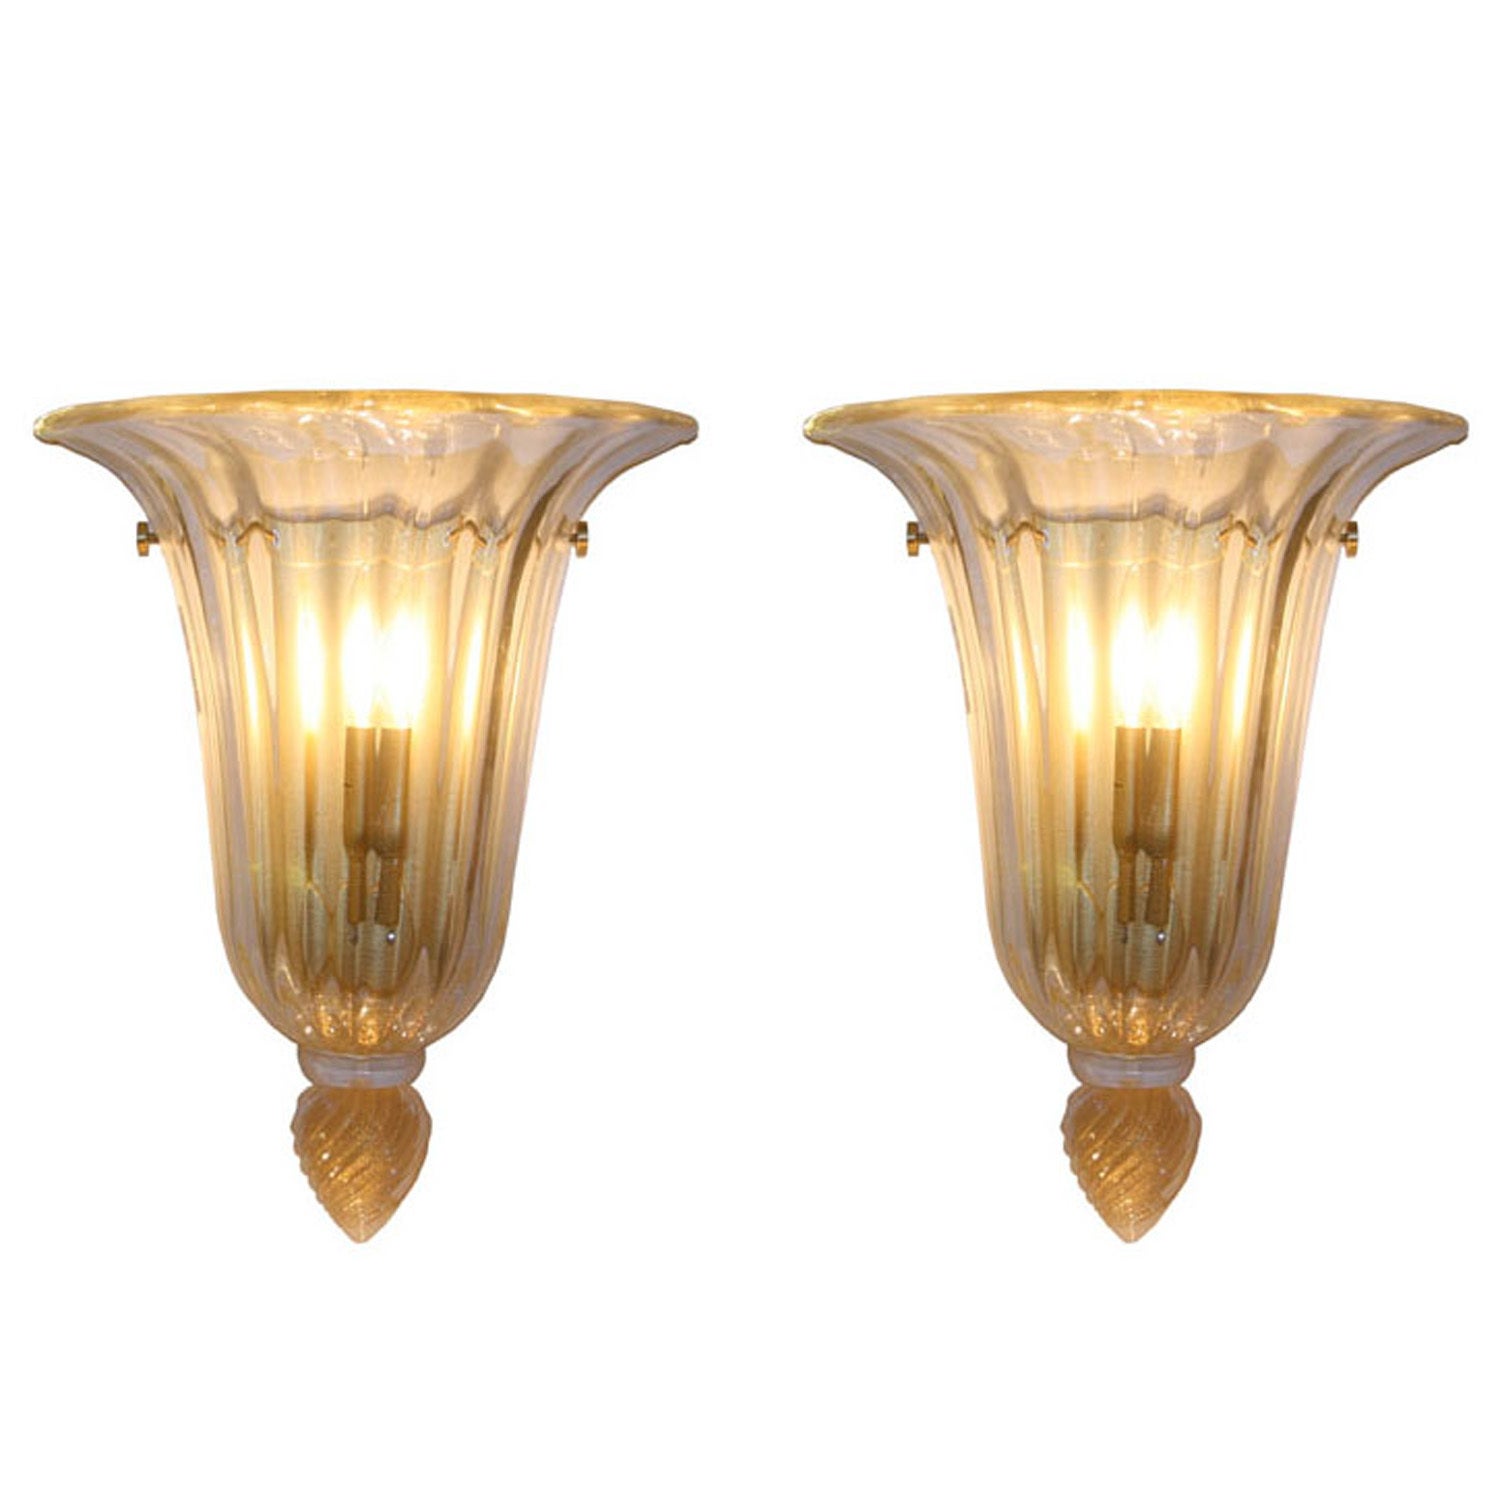 A Pair Of Barovier And Toso Wall Lights For Sale